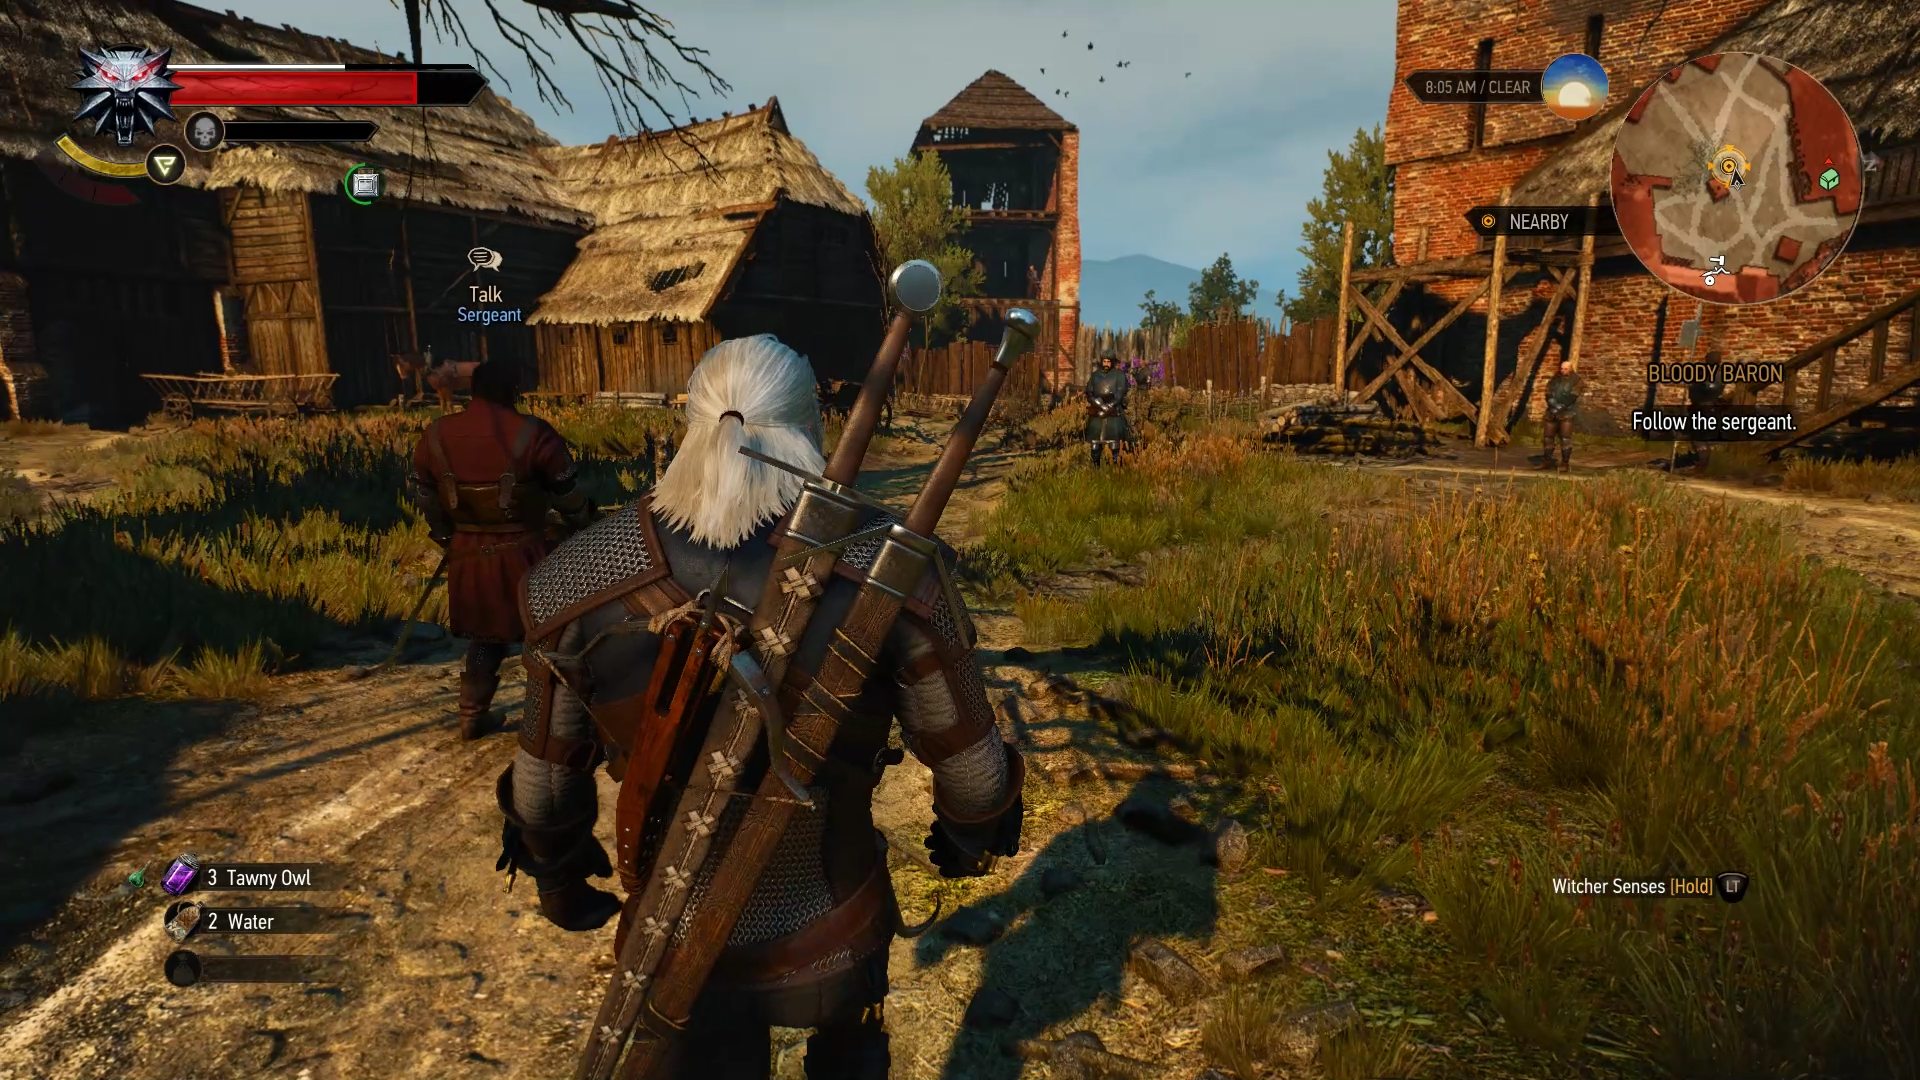 The Witcher 3 Strategy： Bloody Baron (Main Quest) - Velen